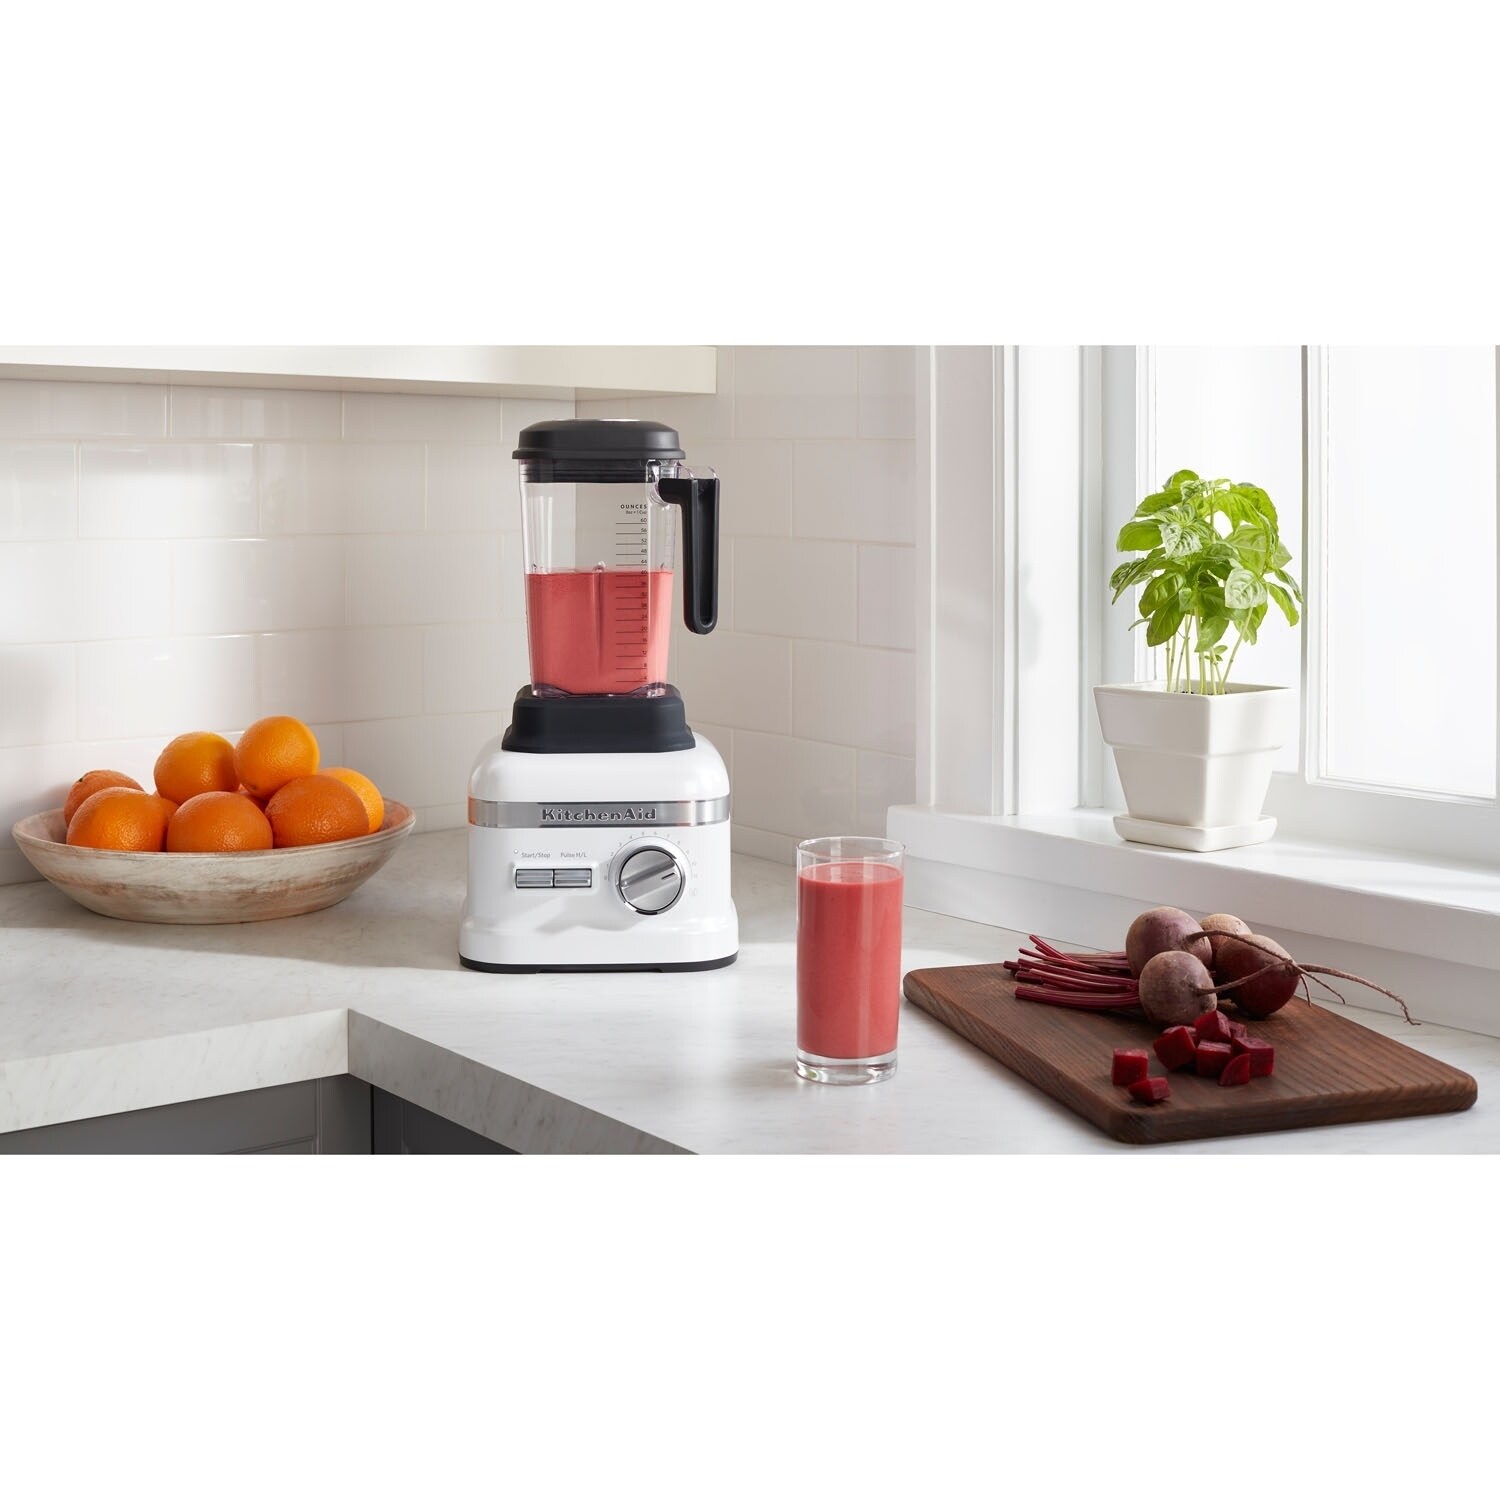 https://ak1.ostkcdn.com/images/products/24224231/KitchenAid-Pro-Line-3.5-HP-Blender-with-Self-Cleaning-Cycle-in-Frosted-Pearl-White-a98f09e8-38df-451a-ad1e-b9f8e54973e2.jpg